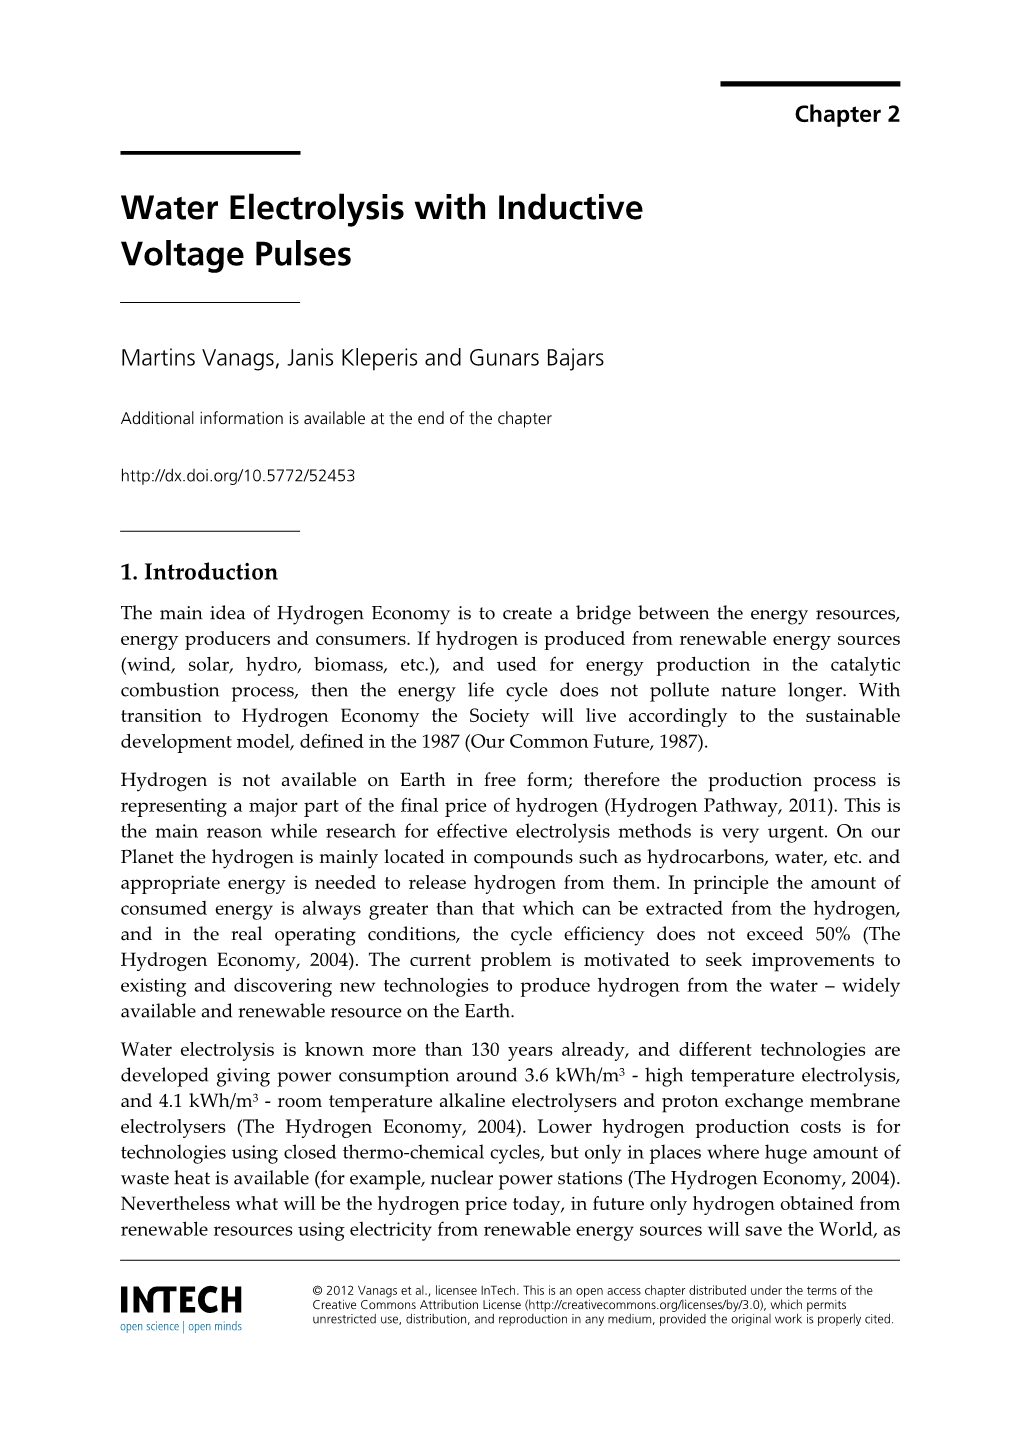 Water Electrolysis with Inductive Voltage Pulses